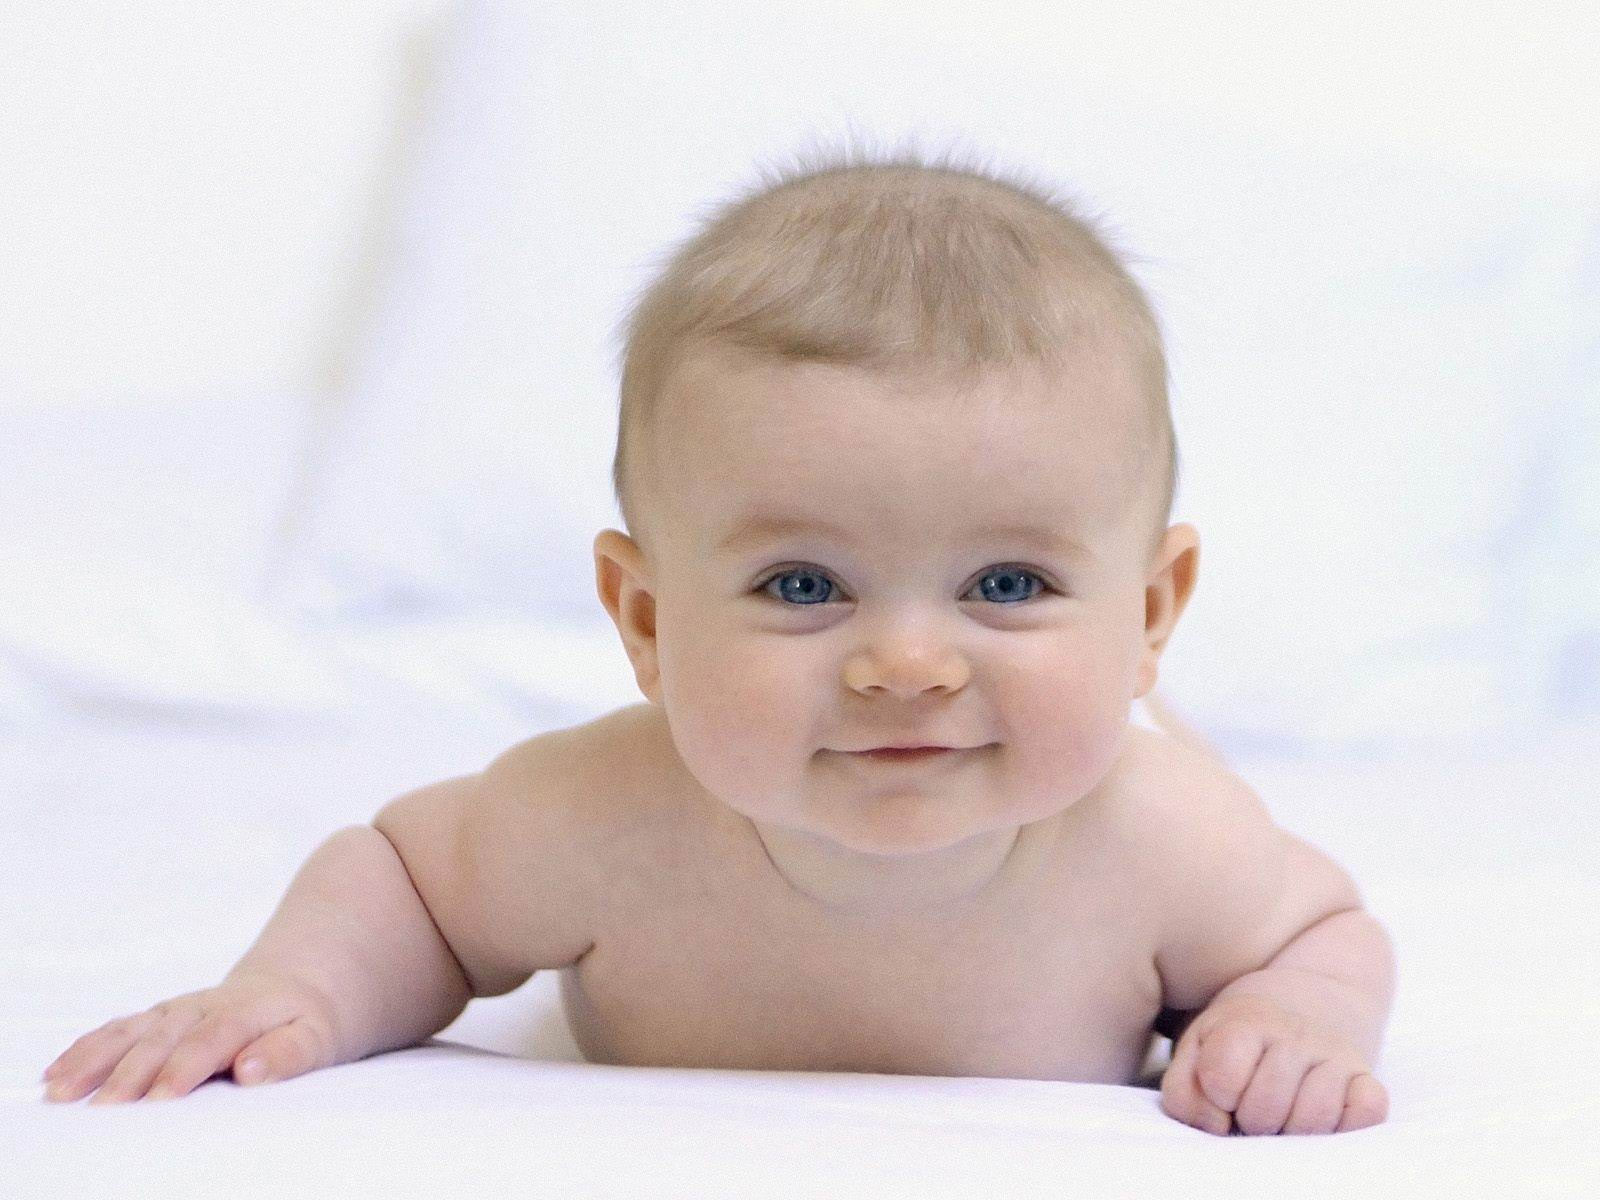  Cute Kids Wallpapers Smiling Crying Babies 6 New Baby Wallpapers